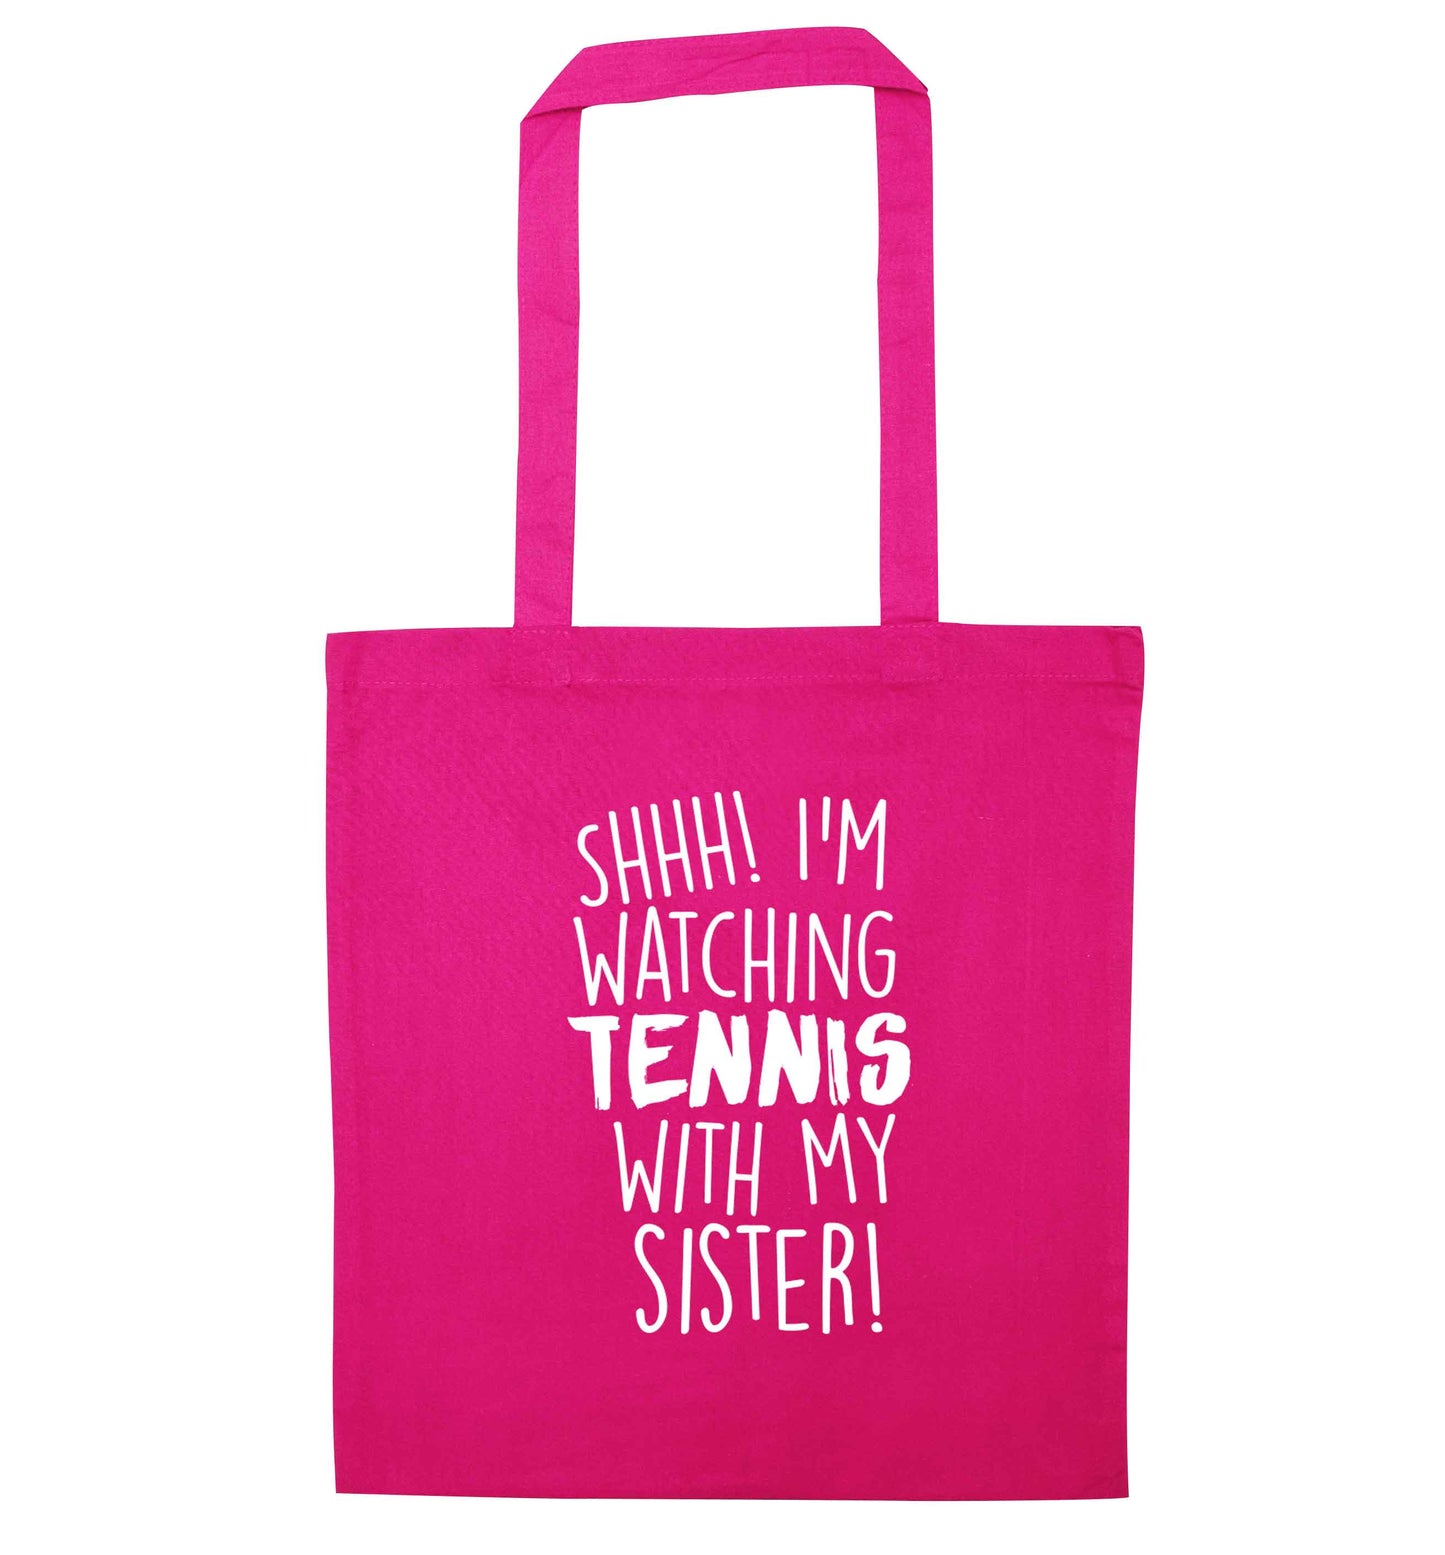 Shh! I'm watching tennis with my sister! pink tote bag